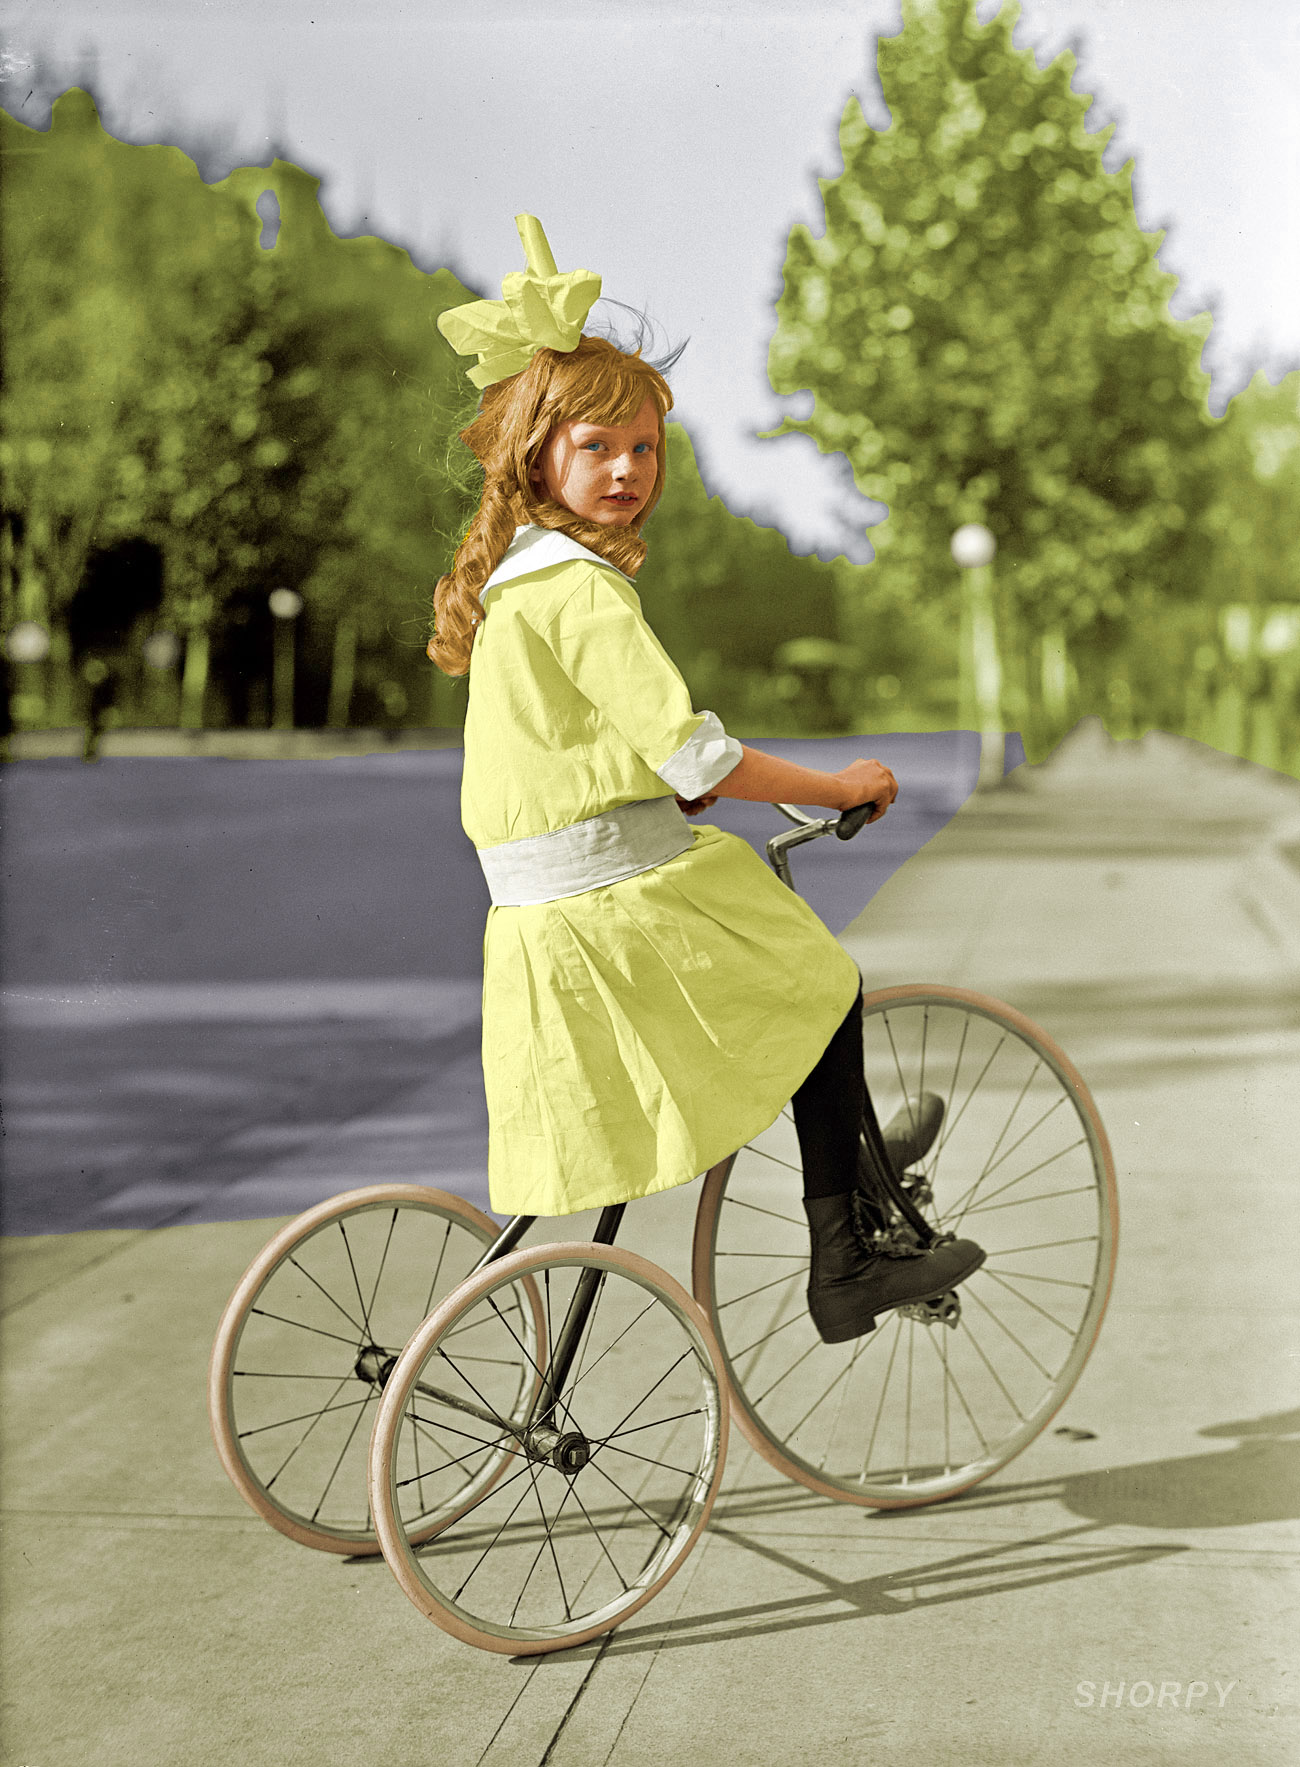 This is a colorized version of Tyke on Trike: 1915. I feel a real connection with this girl. Can you give me her number?  I was thinking that maybe, if she's still single, I might give her a call. View full size.